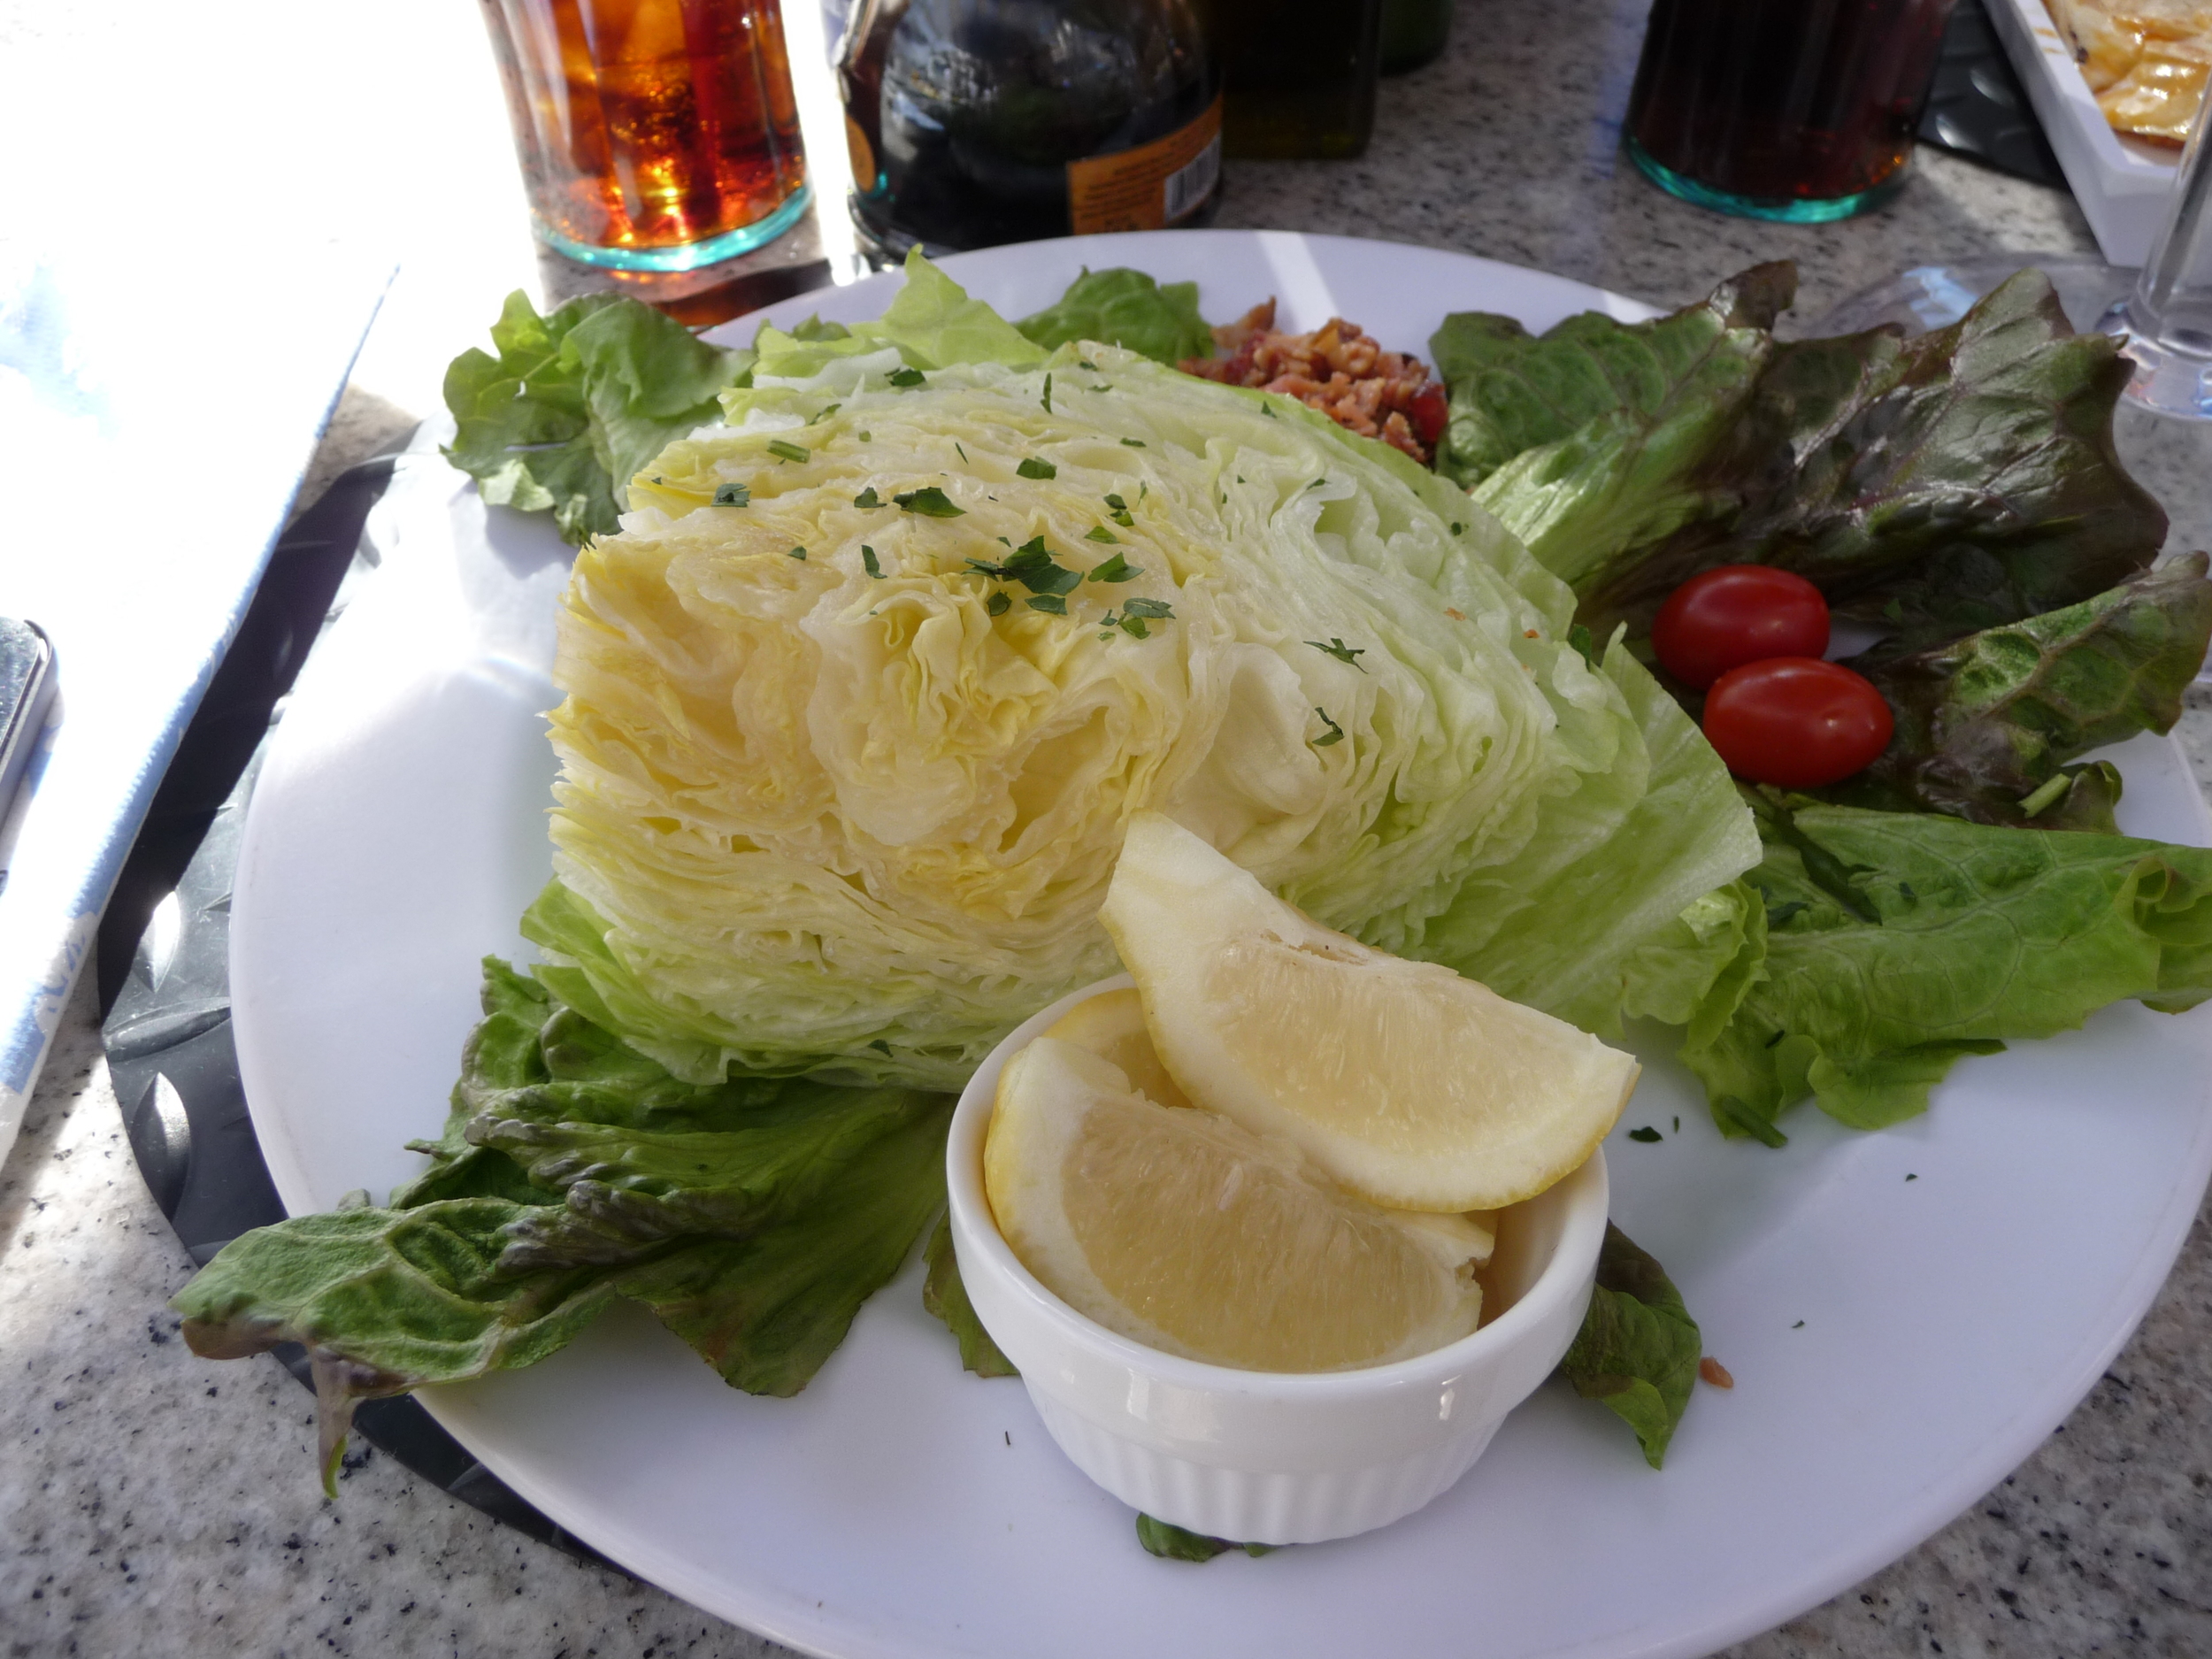  This was an Iceberg lettuce salad at the Paradise Cove Café !!!! 